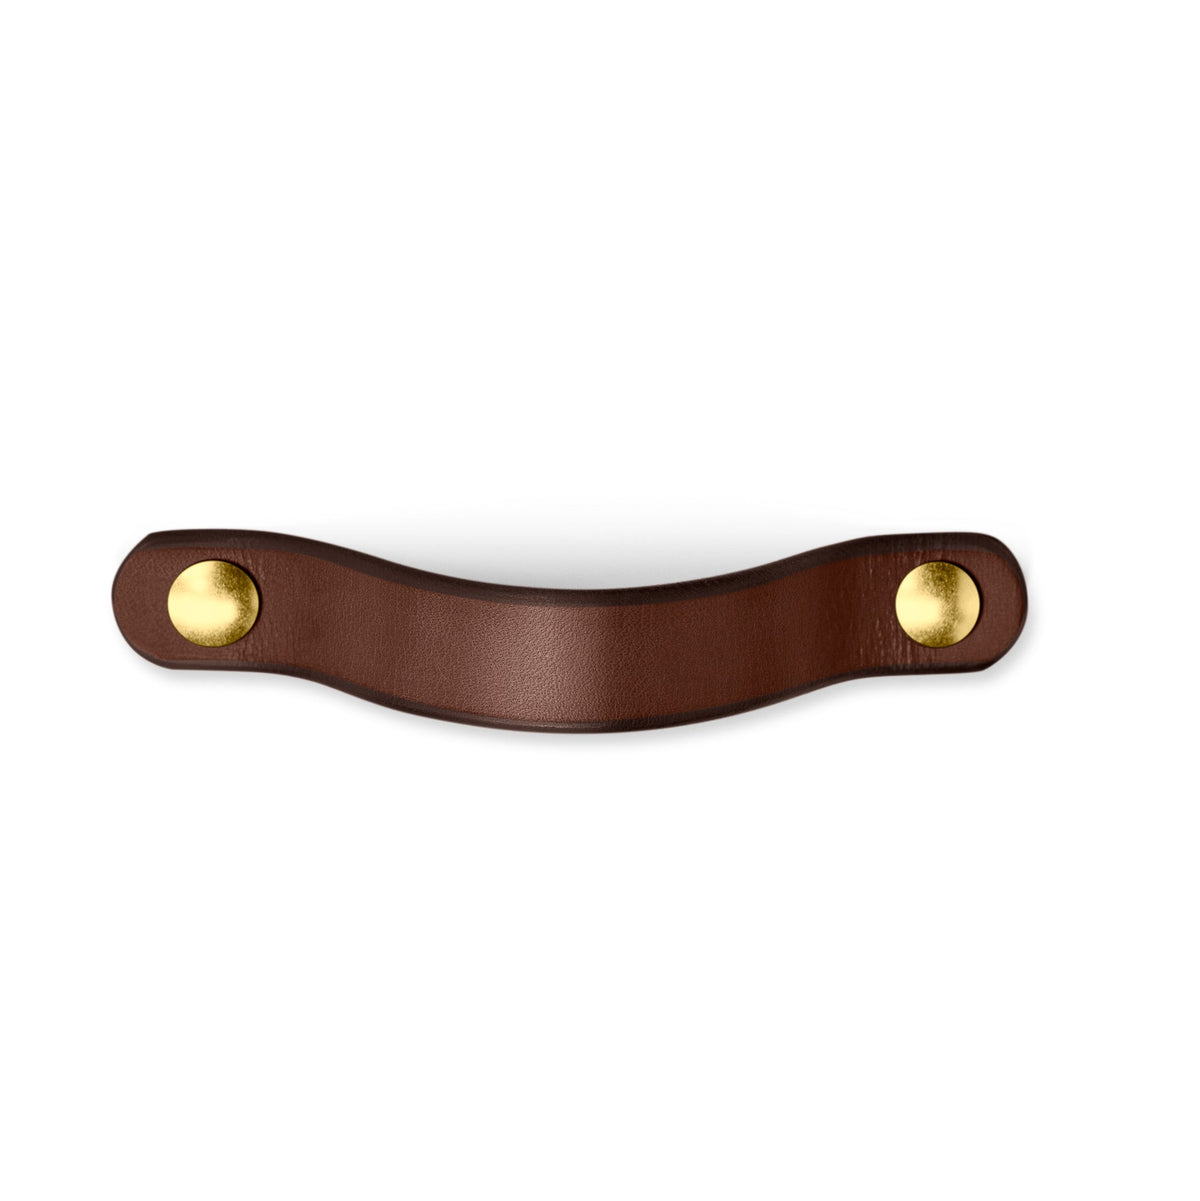 Walnut Studiolo Drawer Pulls Leather Drawer Pull - The Flanders - Dark Brown Leather with Brass Hardware